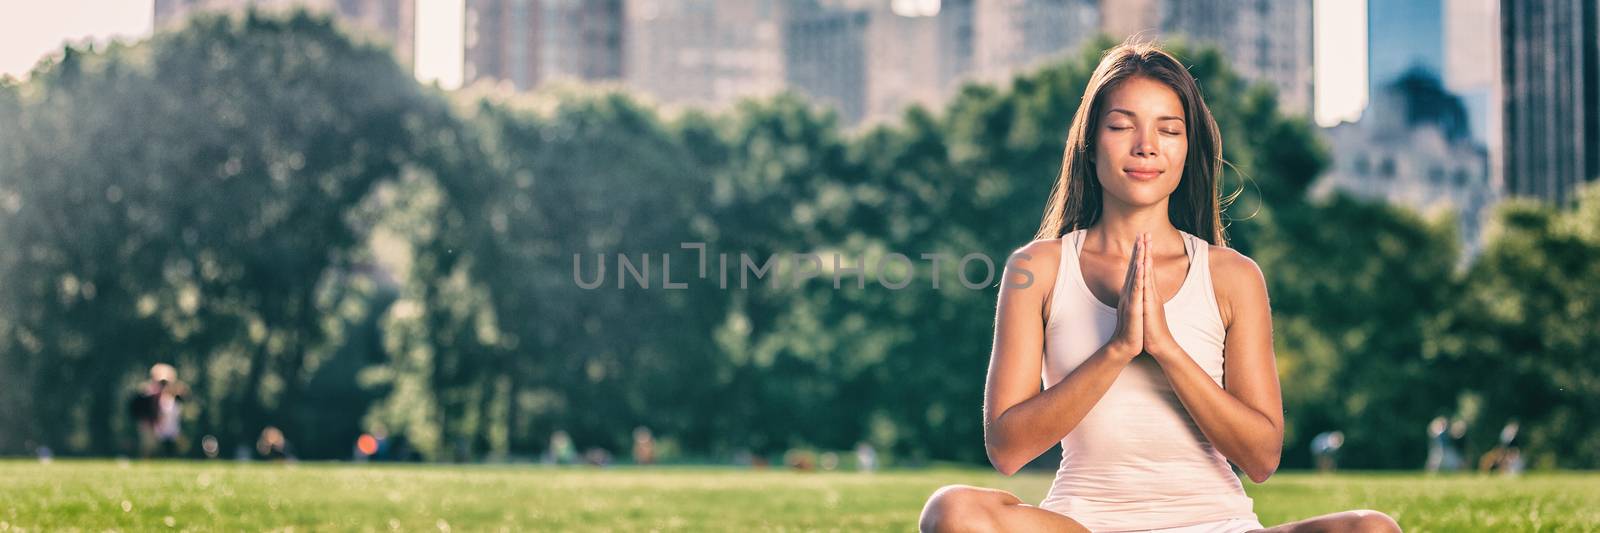 Yoga woman meditation praying outside in city park wellness banner panorama .Summer exercise lifestyle active young Asian girl meditating background by Maridav